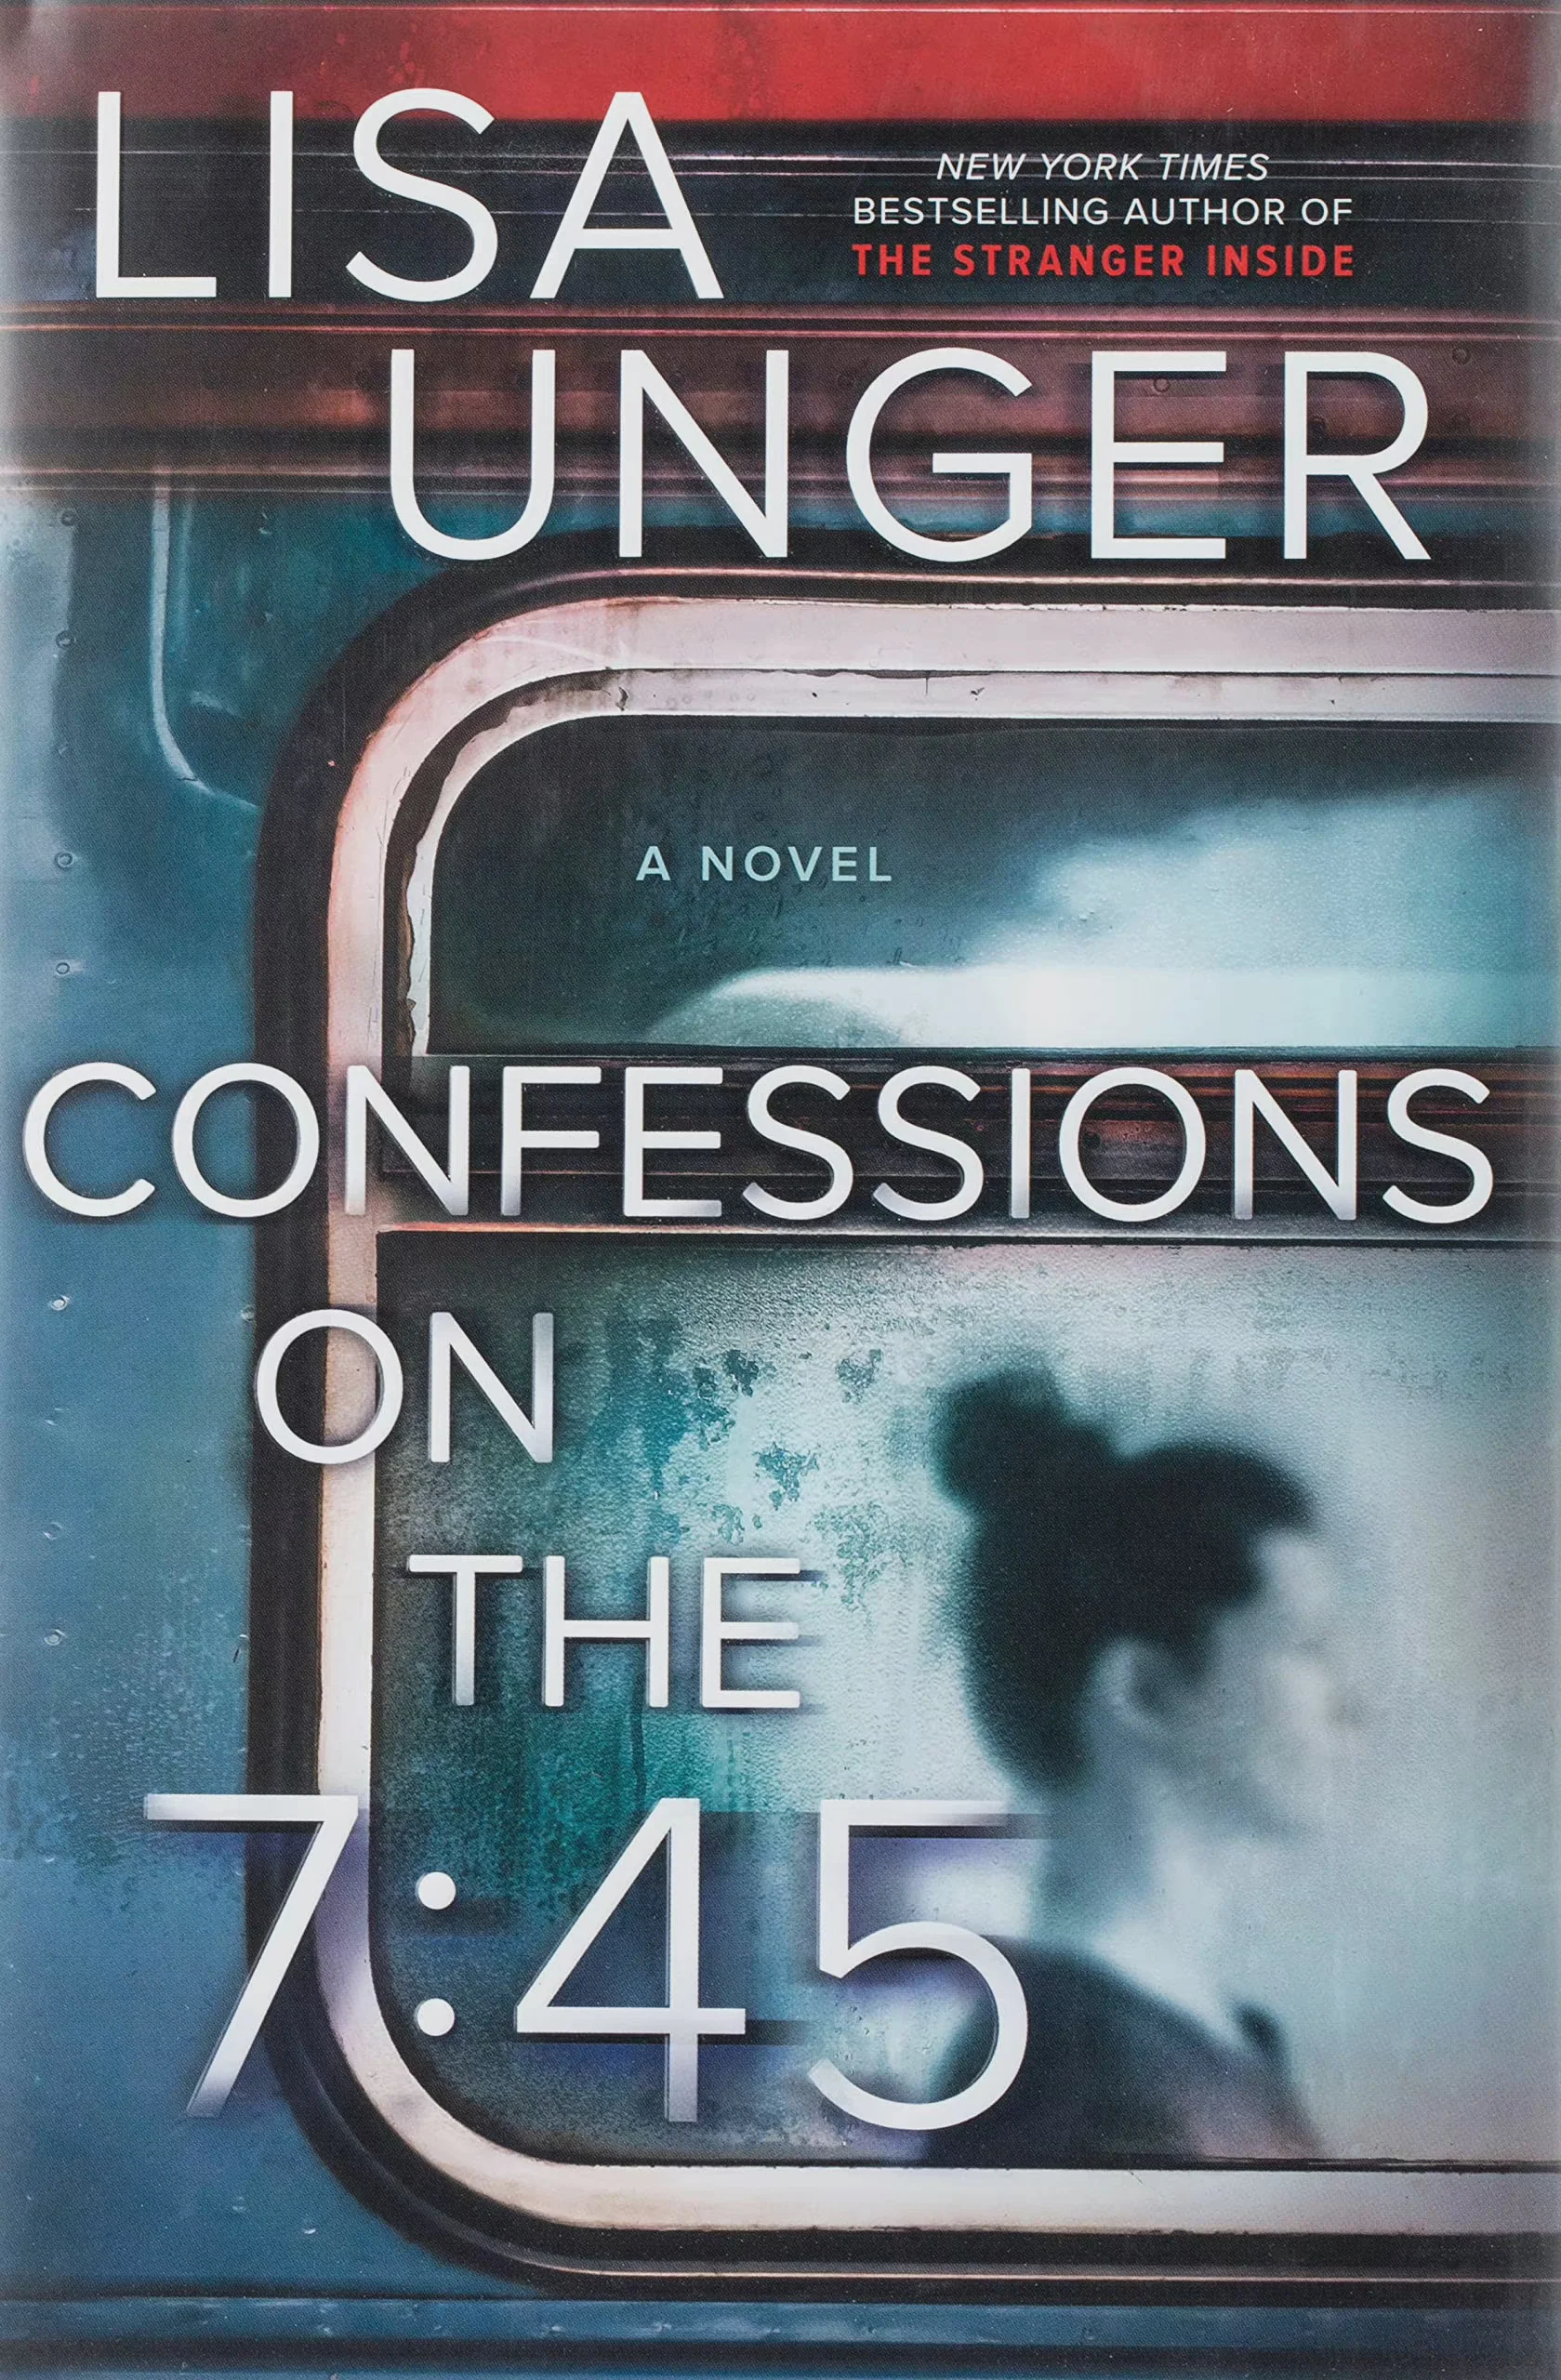 "Confessions on the 7:45":Jessica Alba will star in Netflix's new psychological thriller film